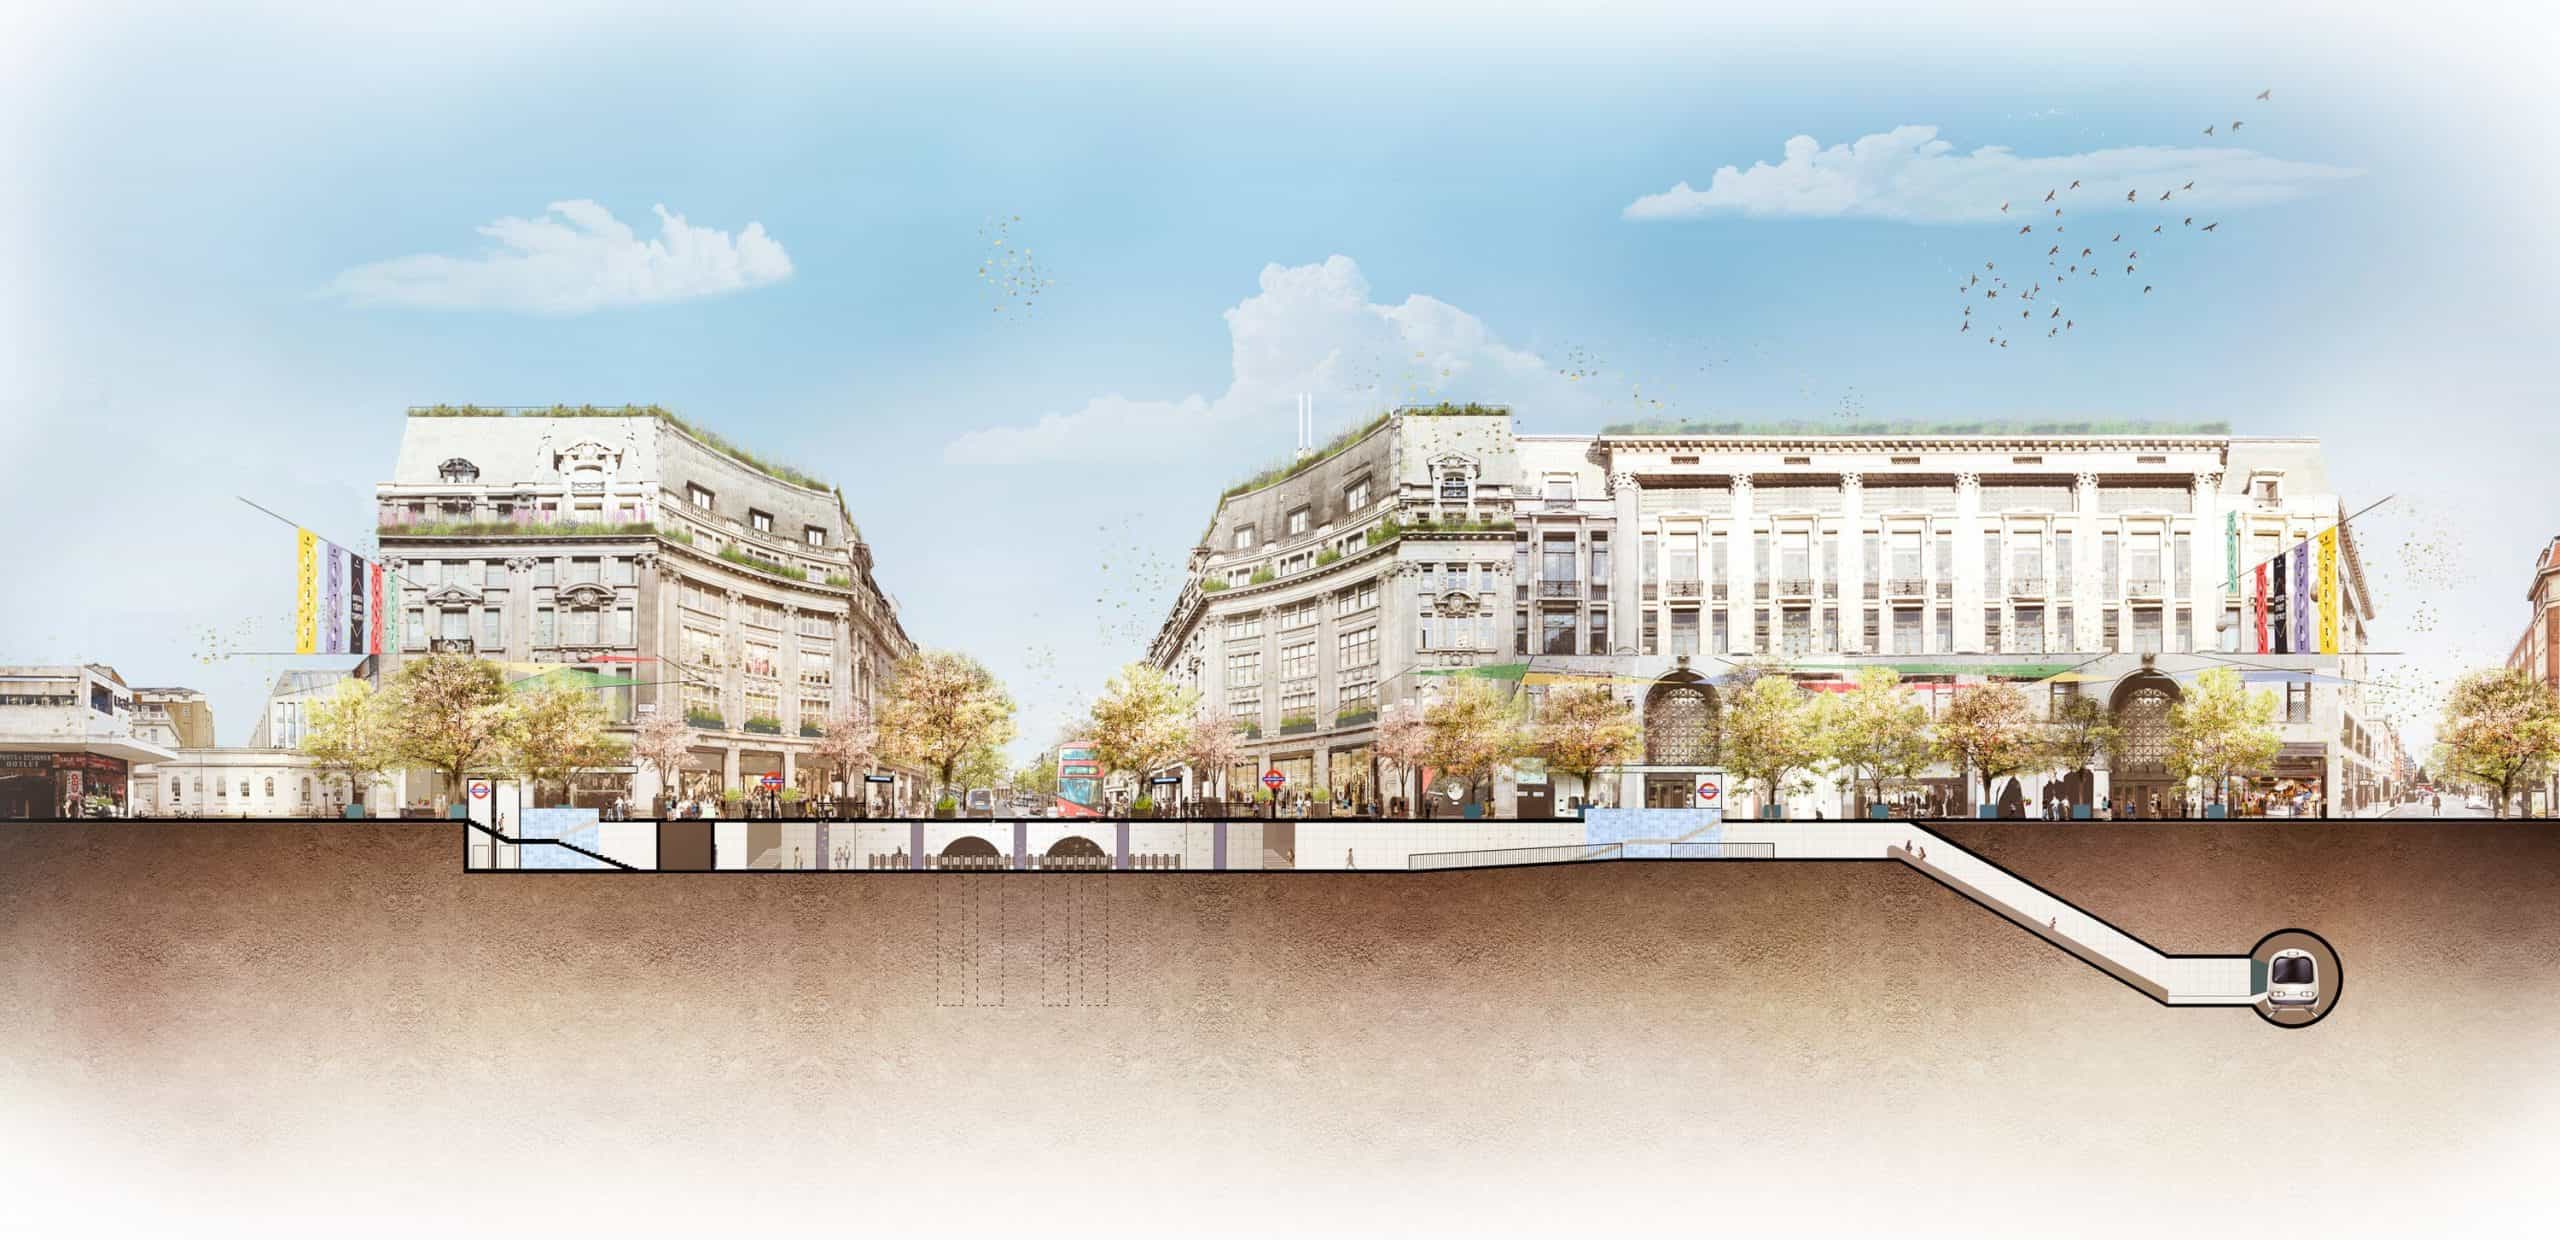 Revealed: Plans to pedestrianise Oxford Circus with two ‘piazzas’